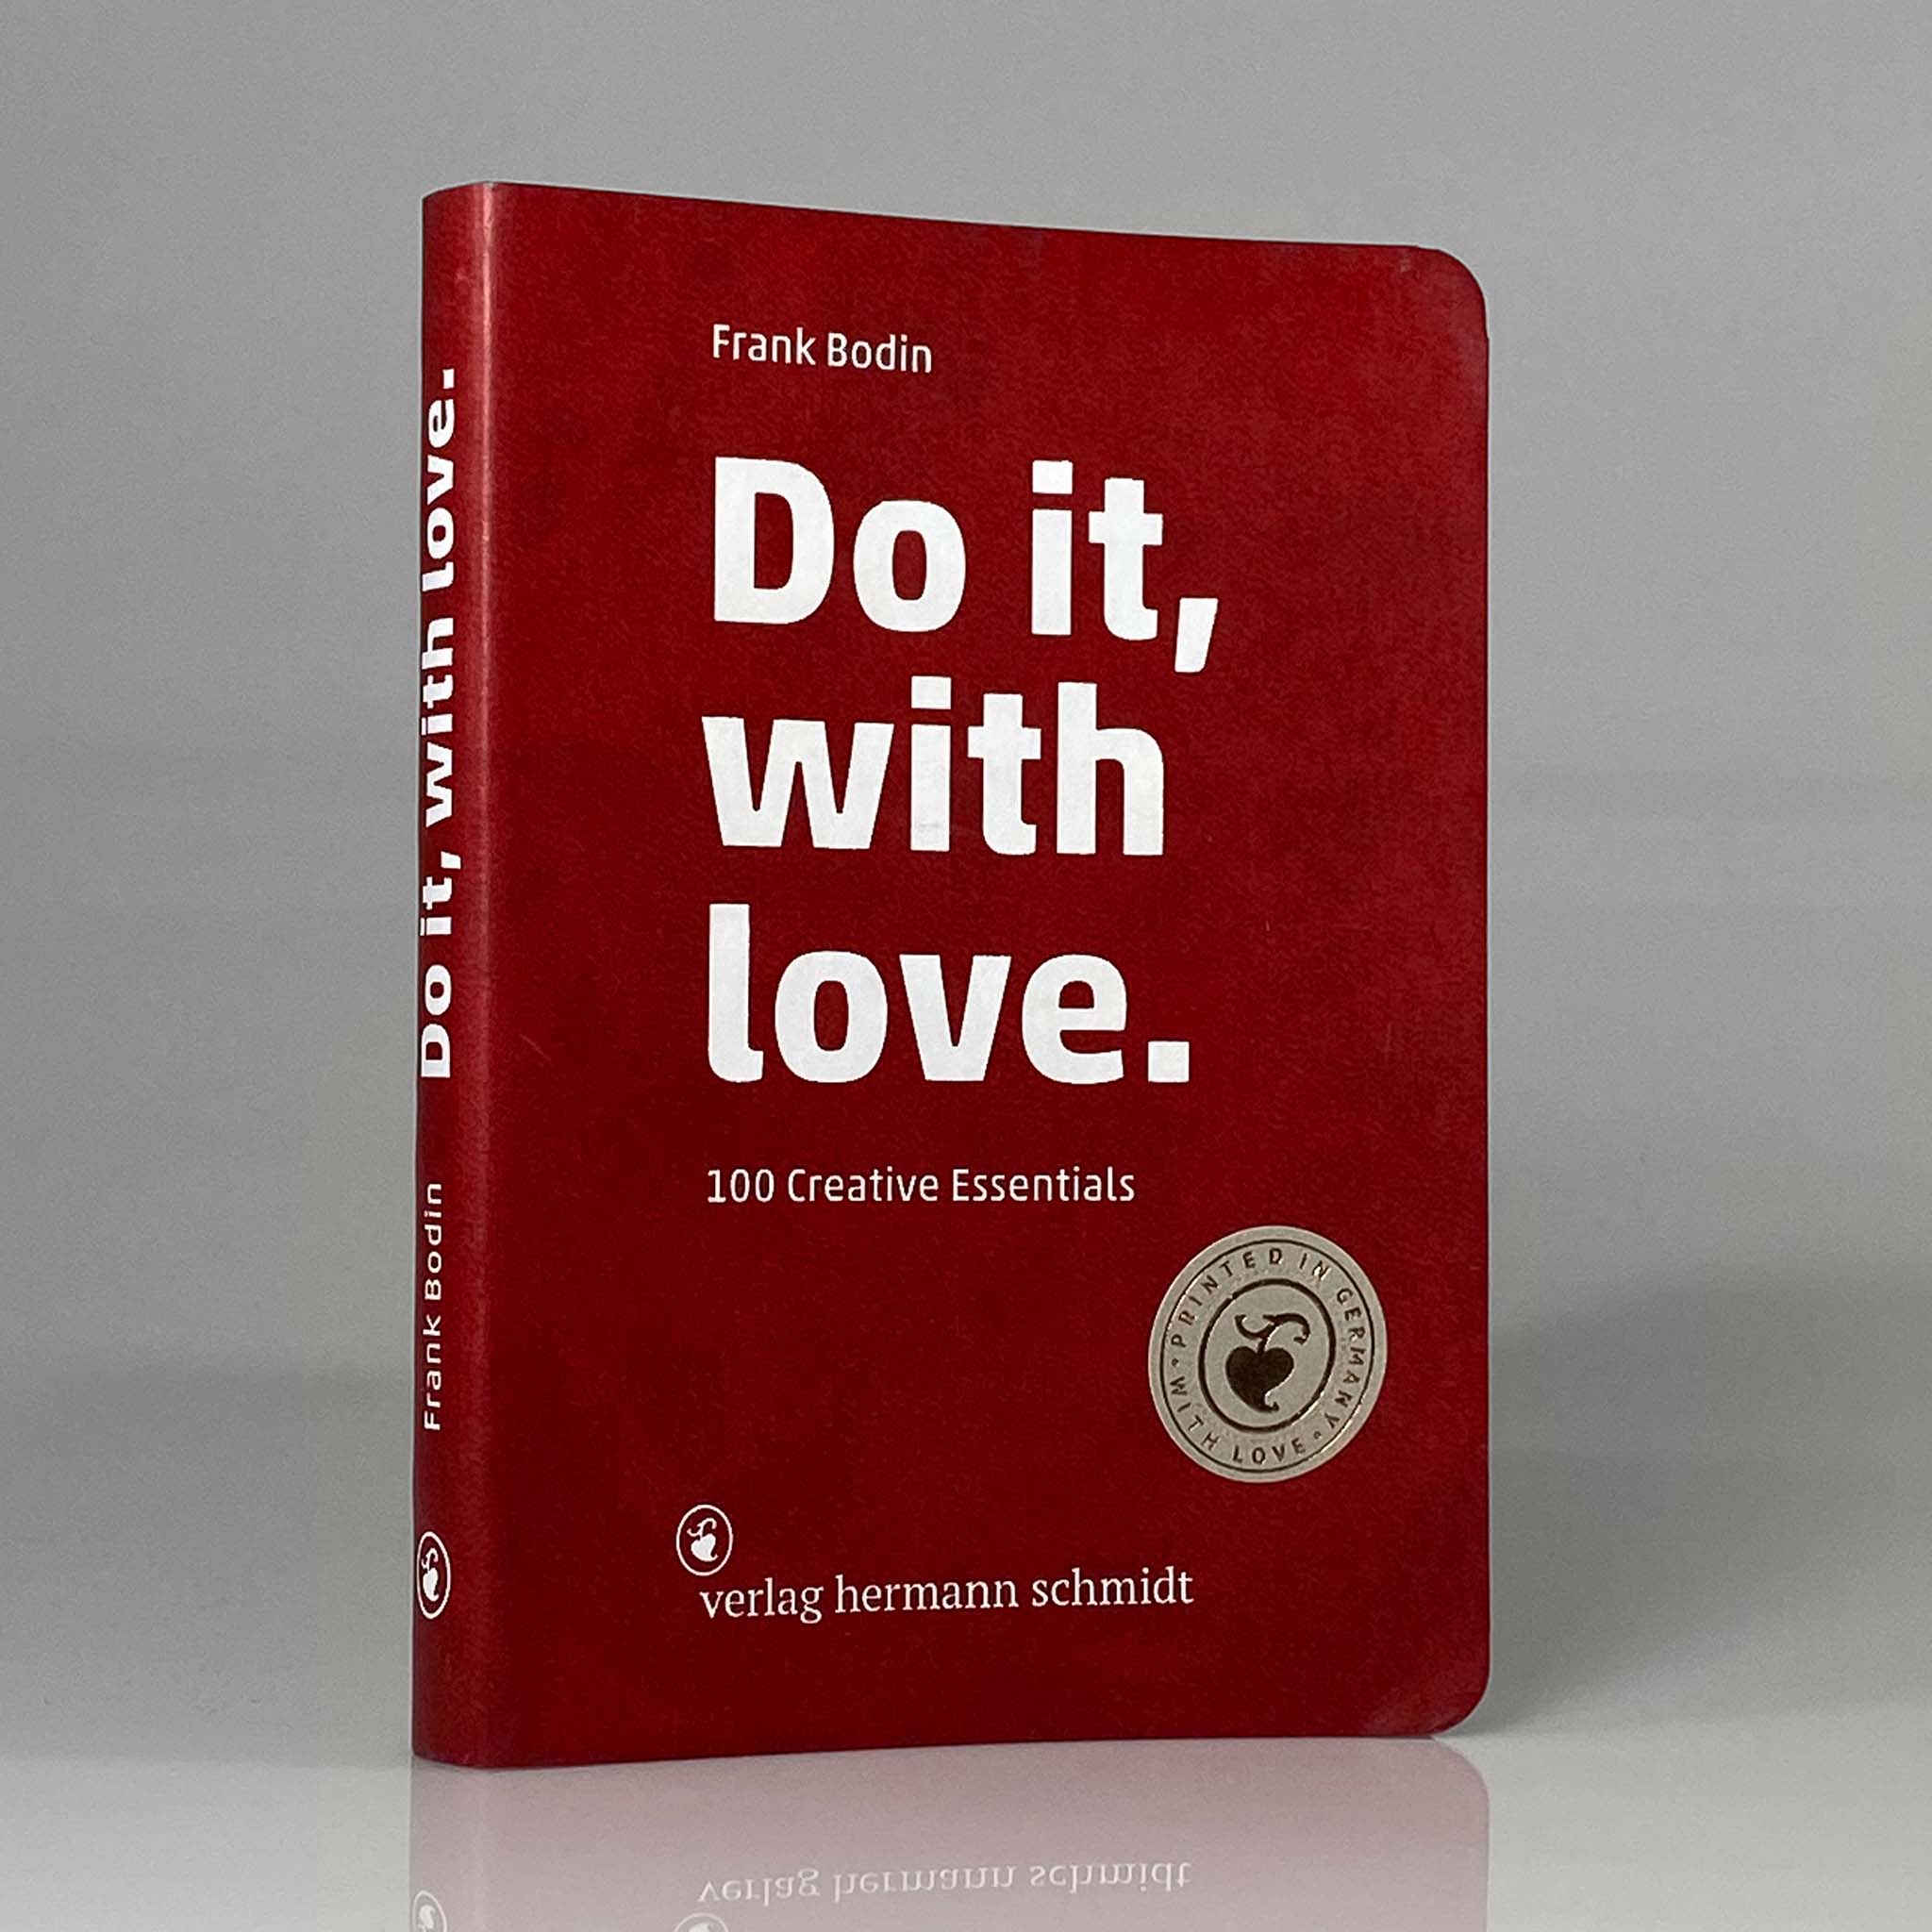 Do It, With Love: 100 Creative Essentials